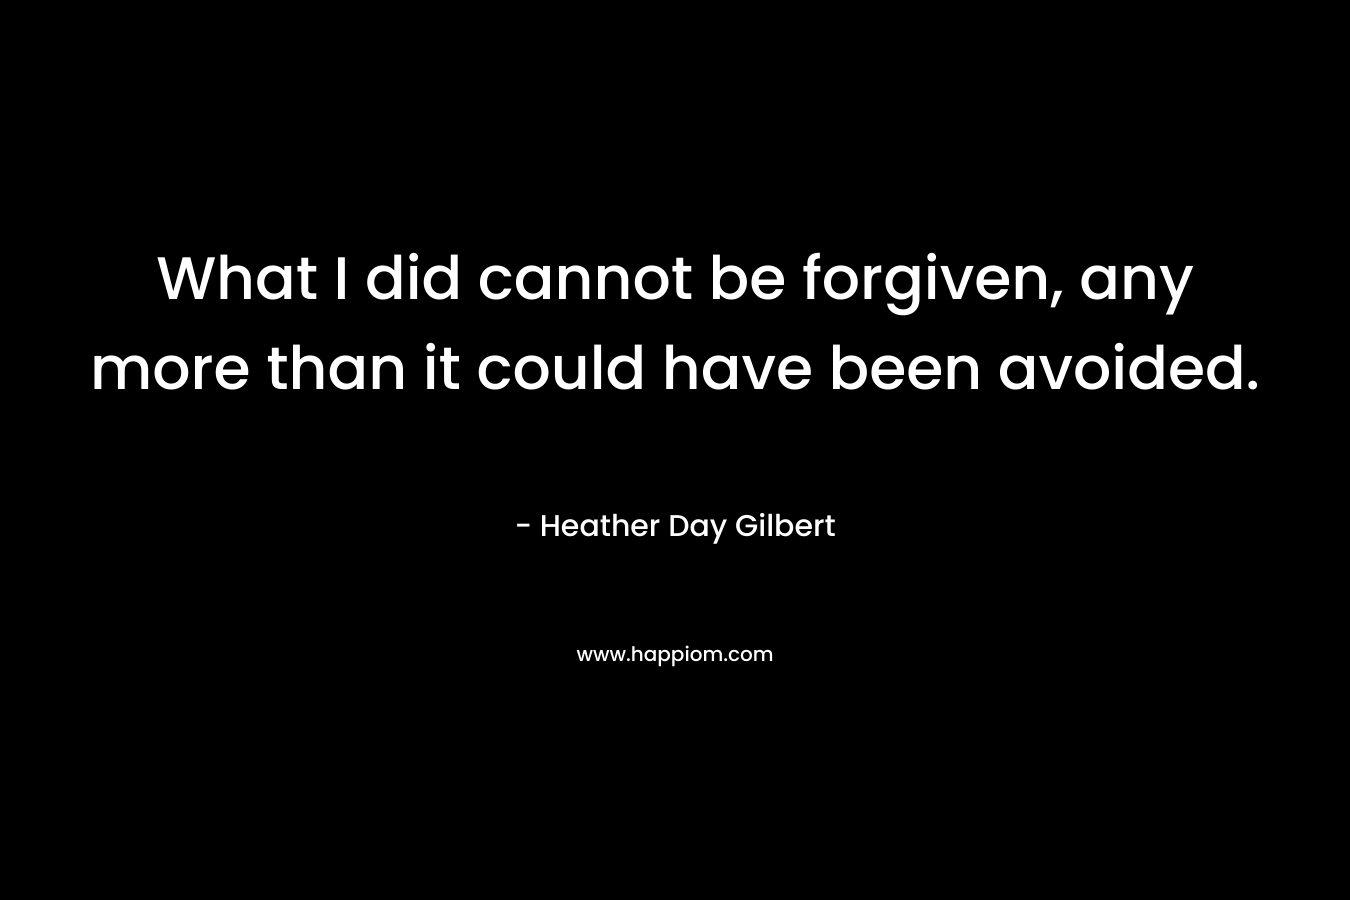 What I did cannot be forgiven, any more than it could have been avoided. – Heather Day Gilbert